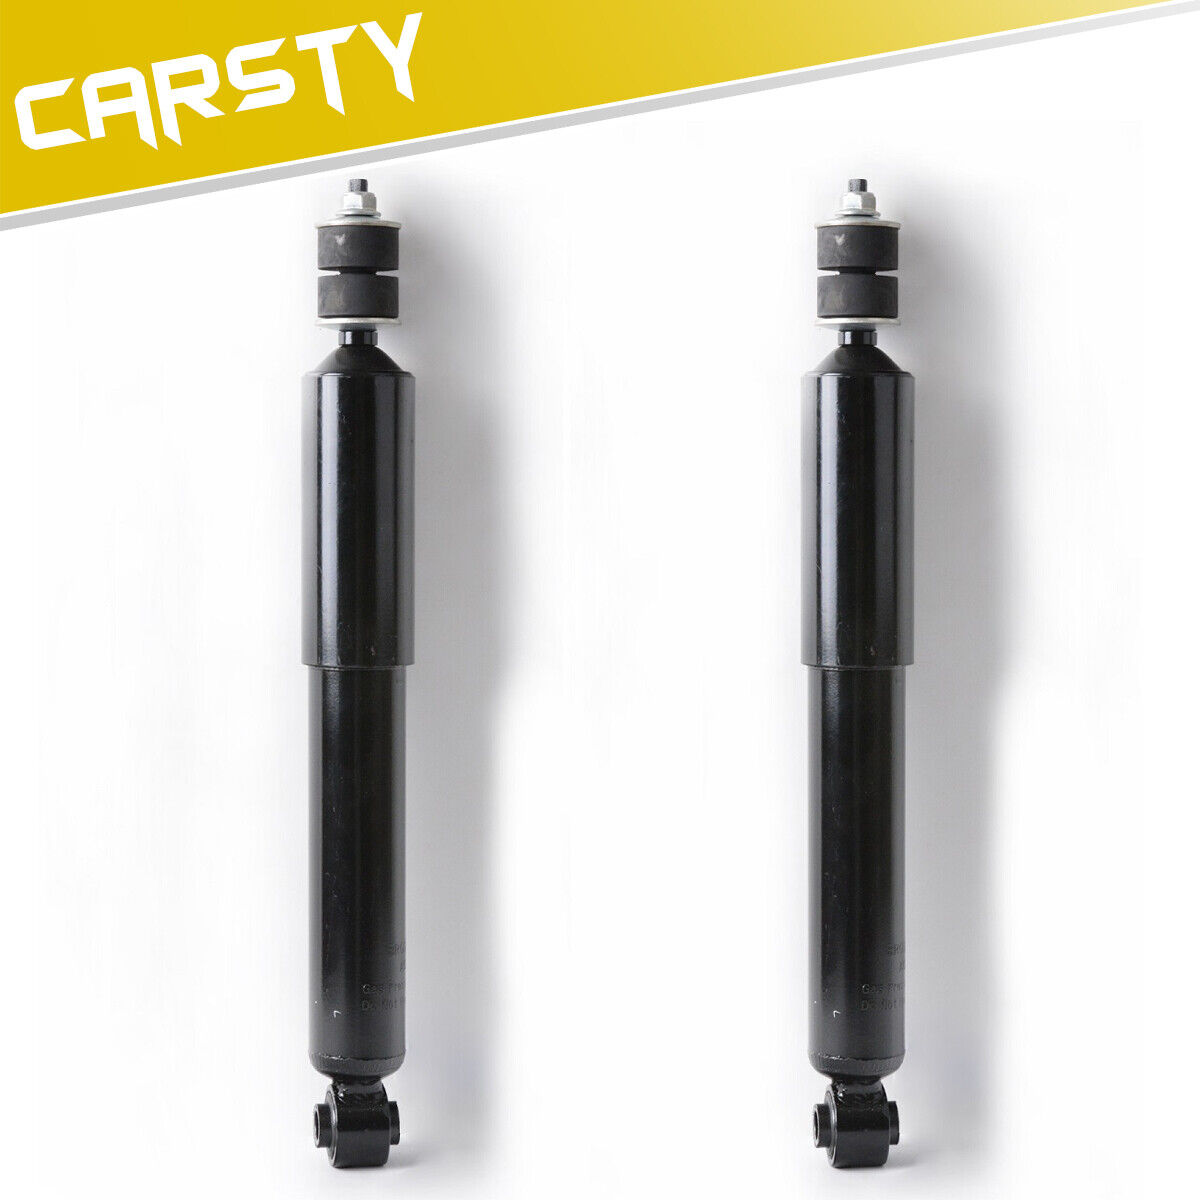 CARSTY Front Pair Shock Absorbers for 2002 2003 2004 2005 Dodge Ram 1500 4X4